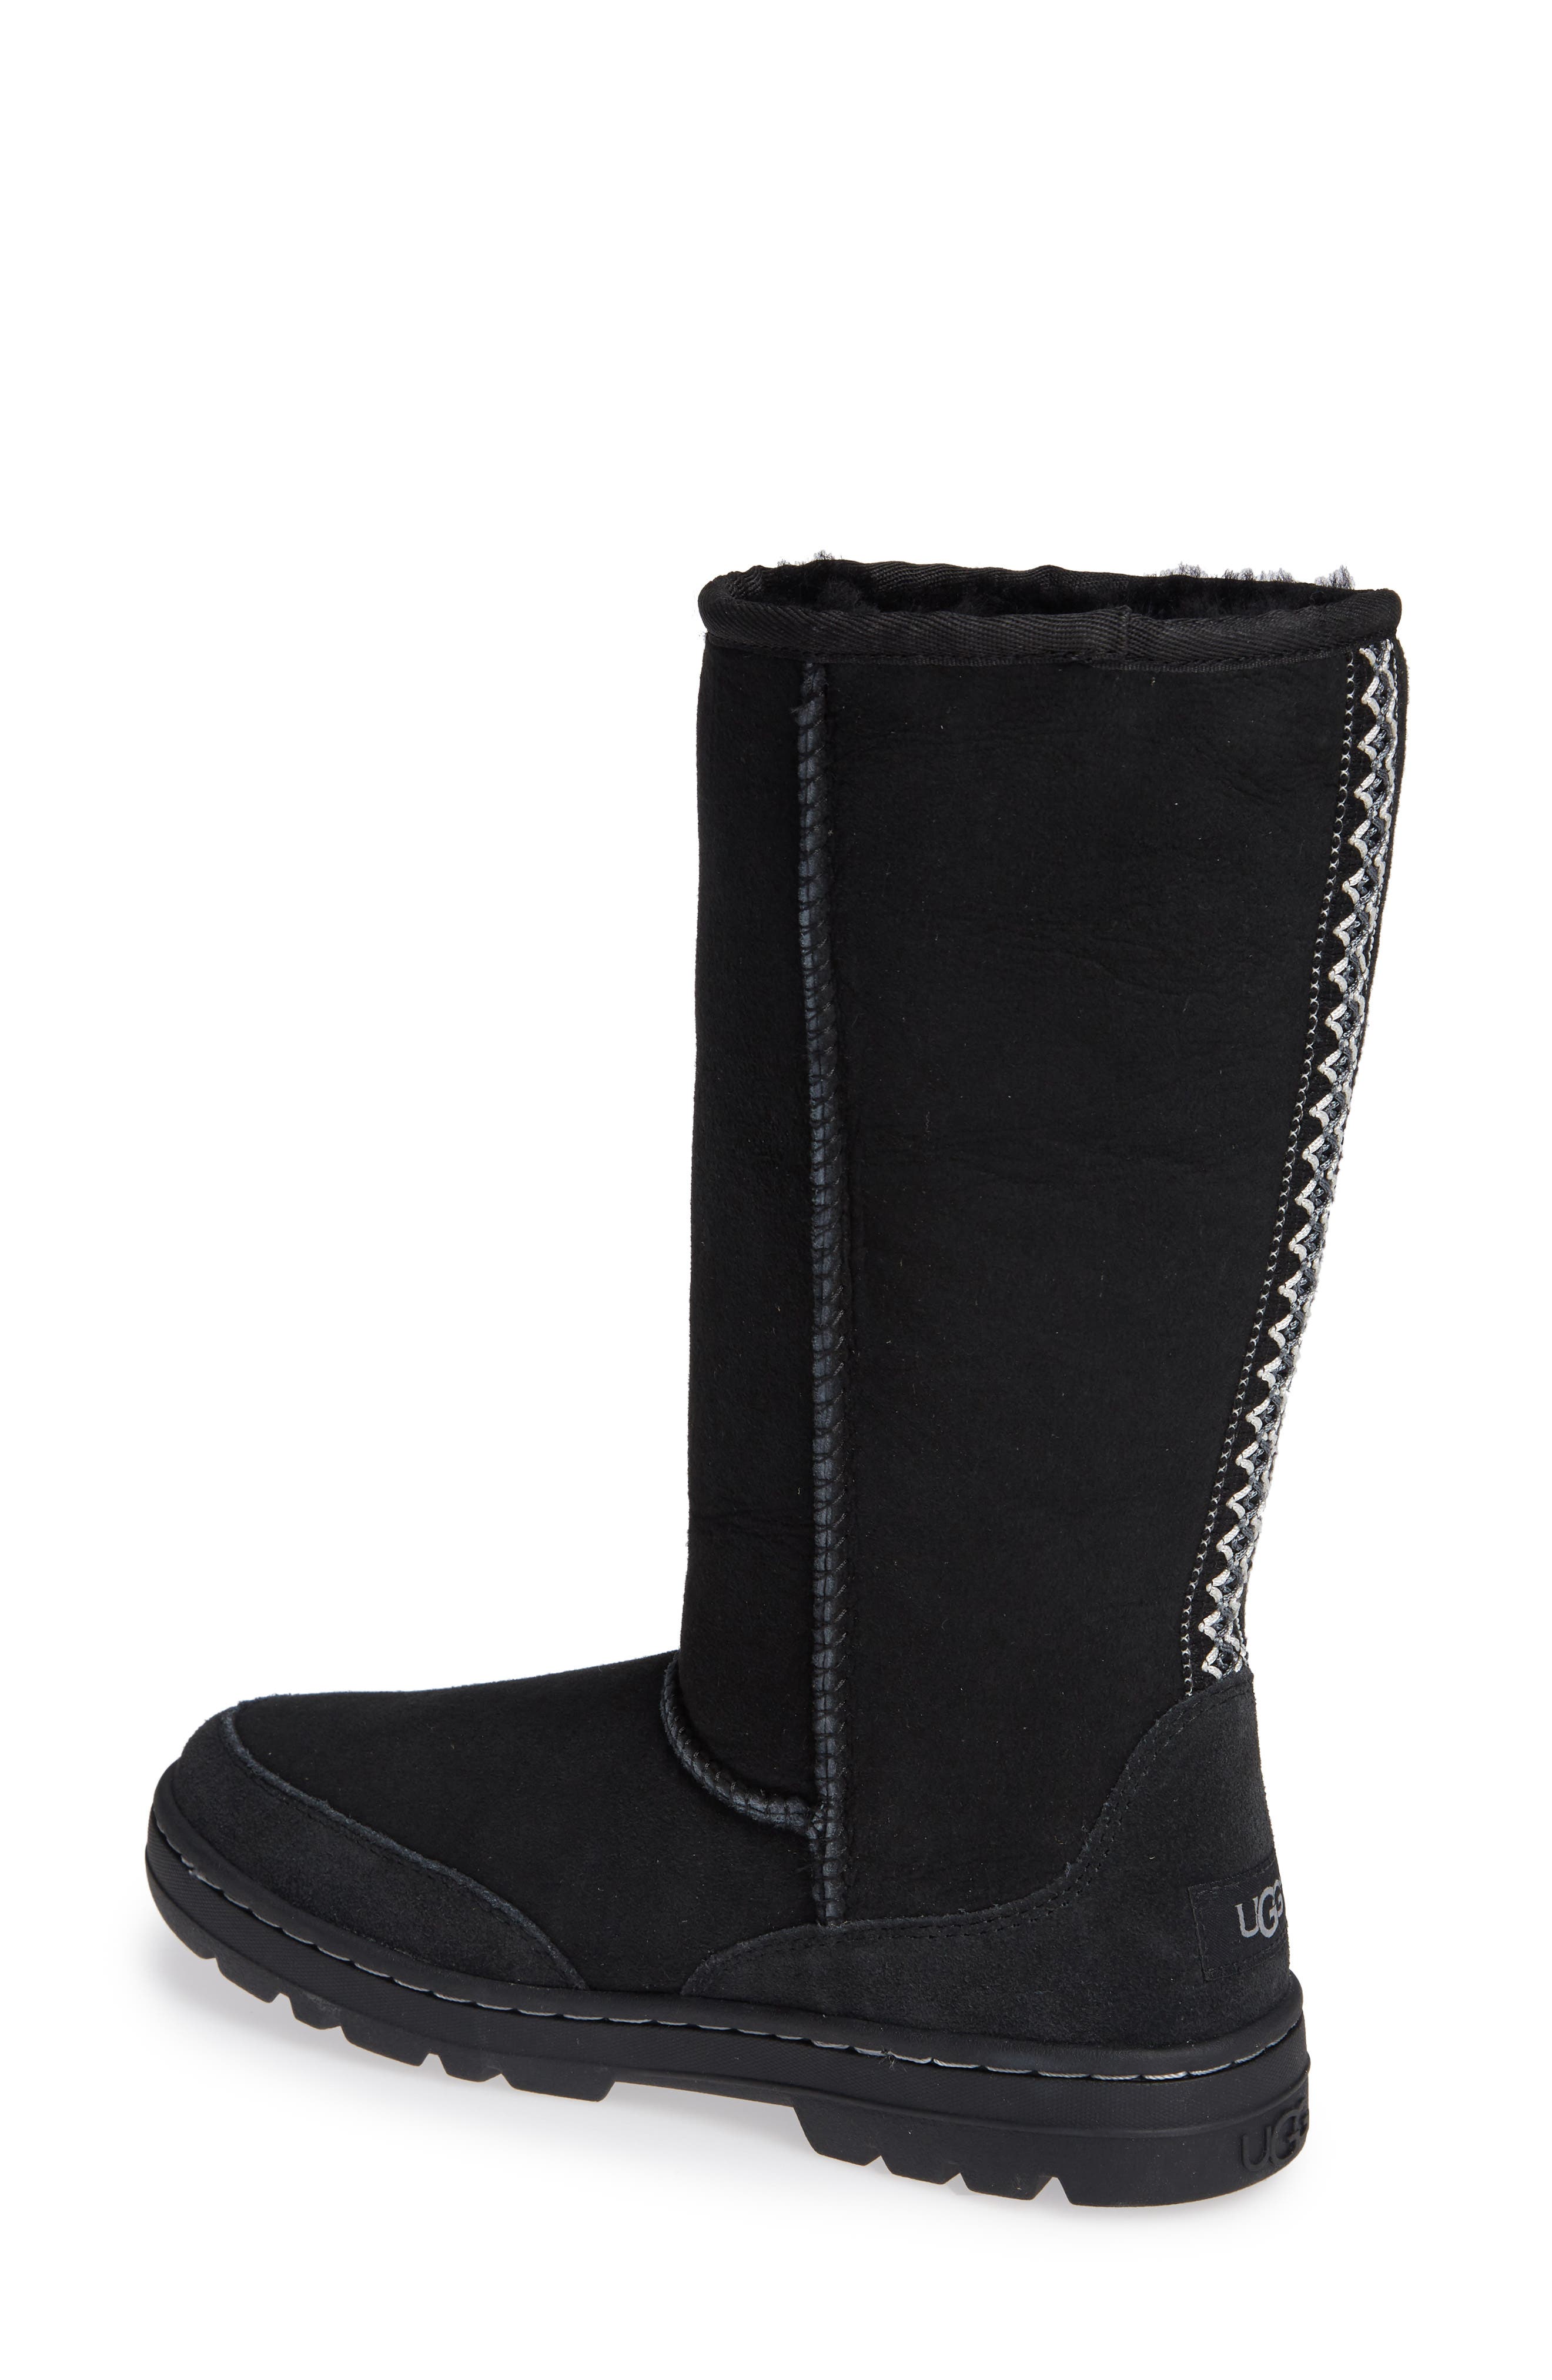 ugg revival tall